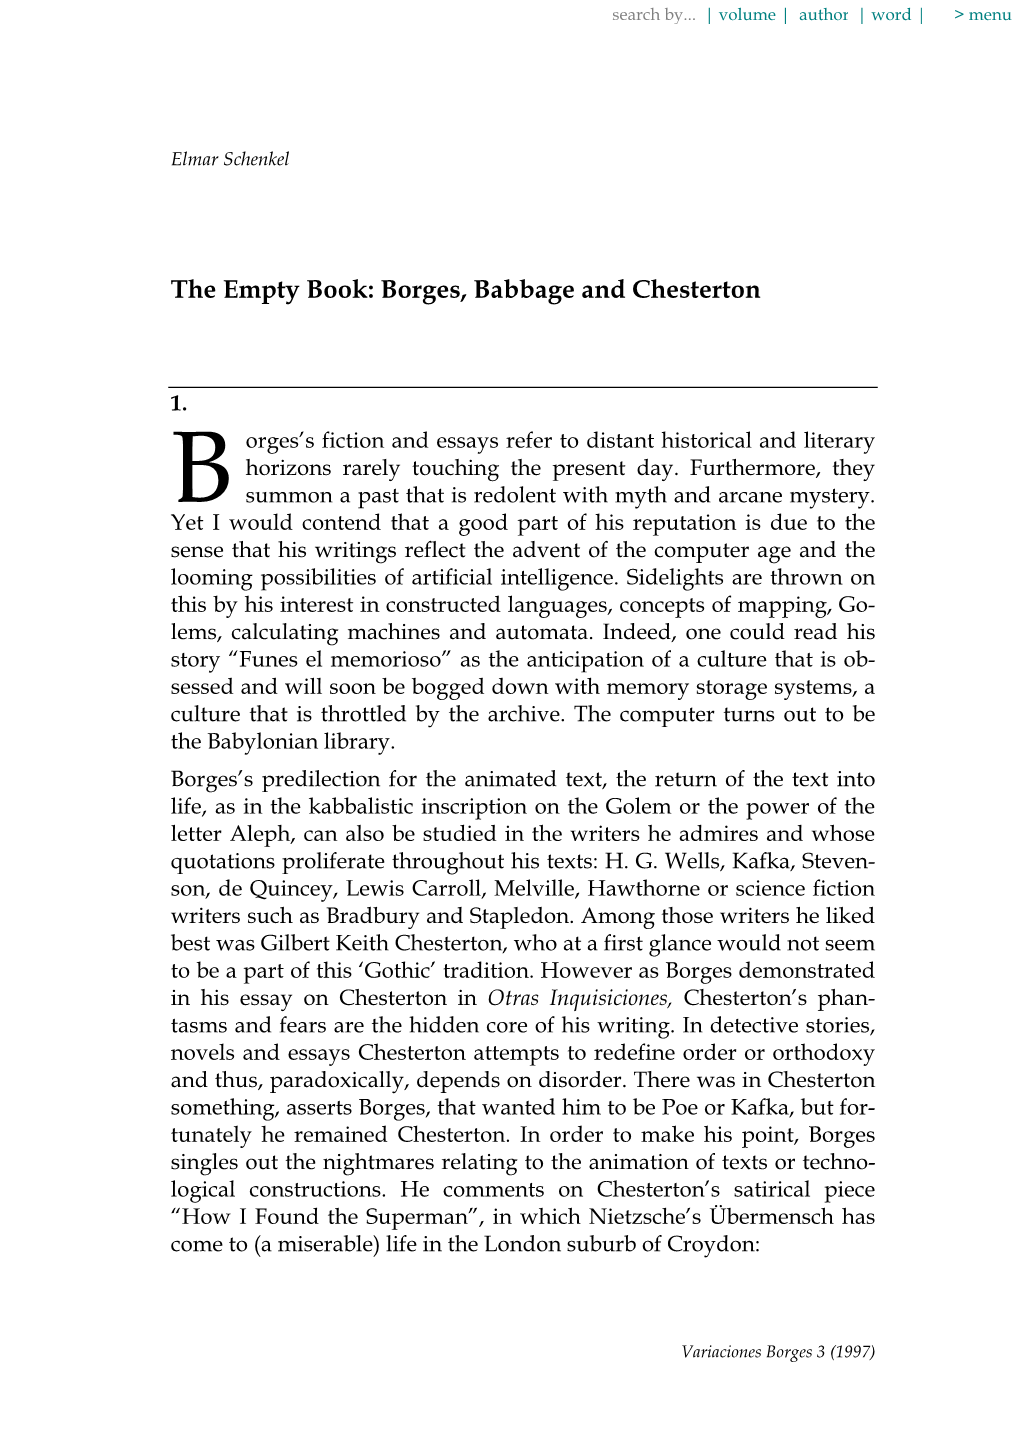 The Empty Book: Borges Babbage and Chesterton